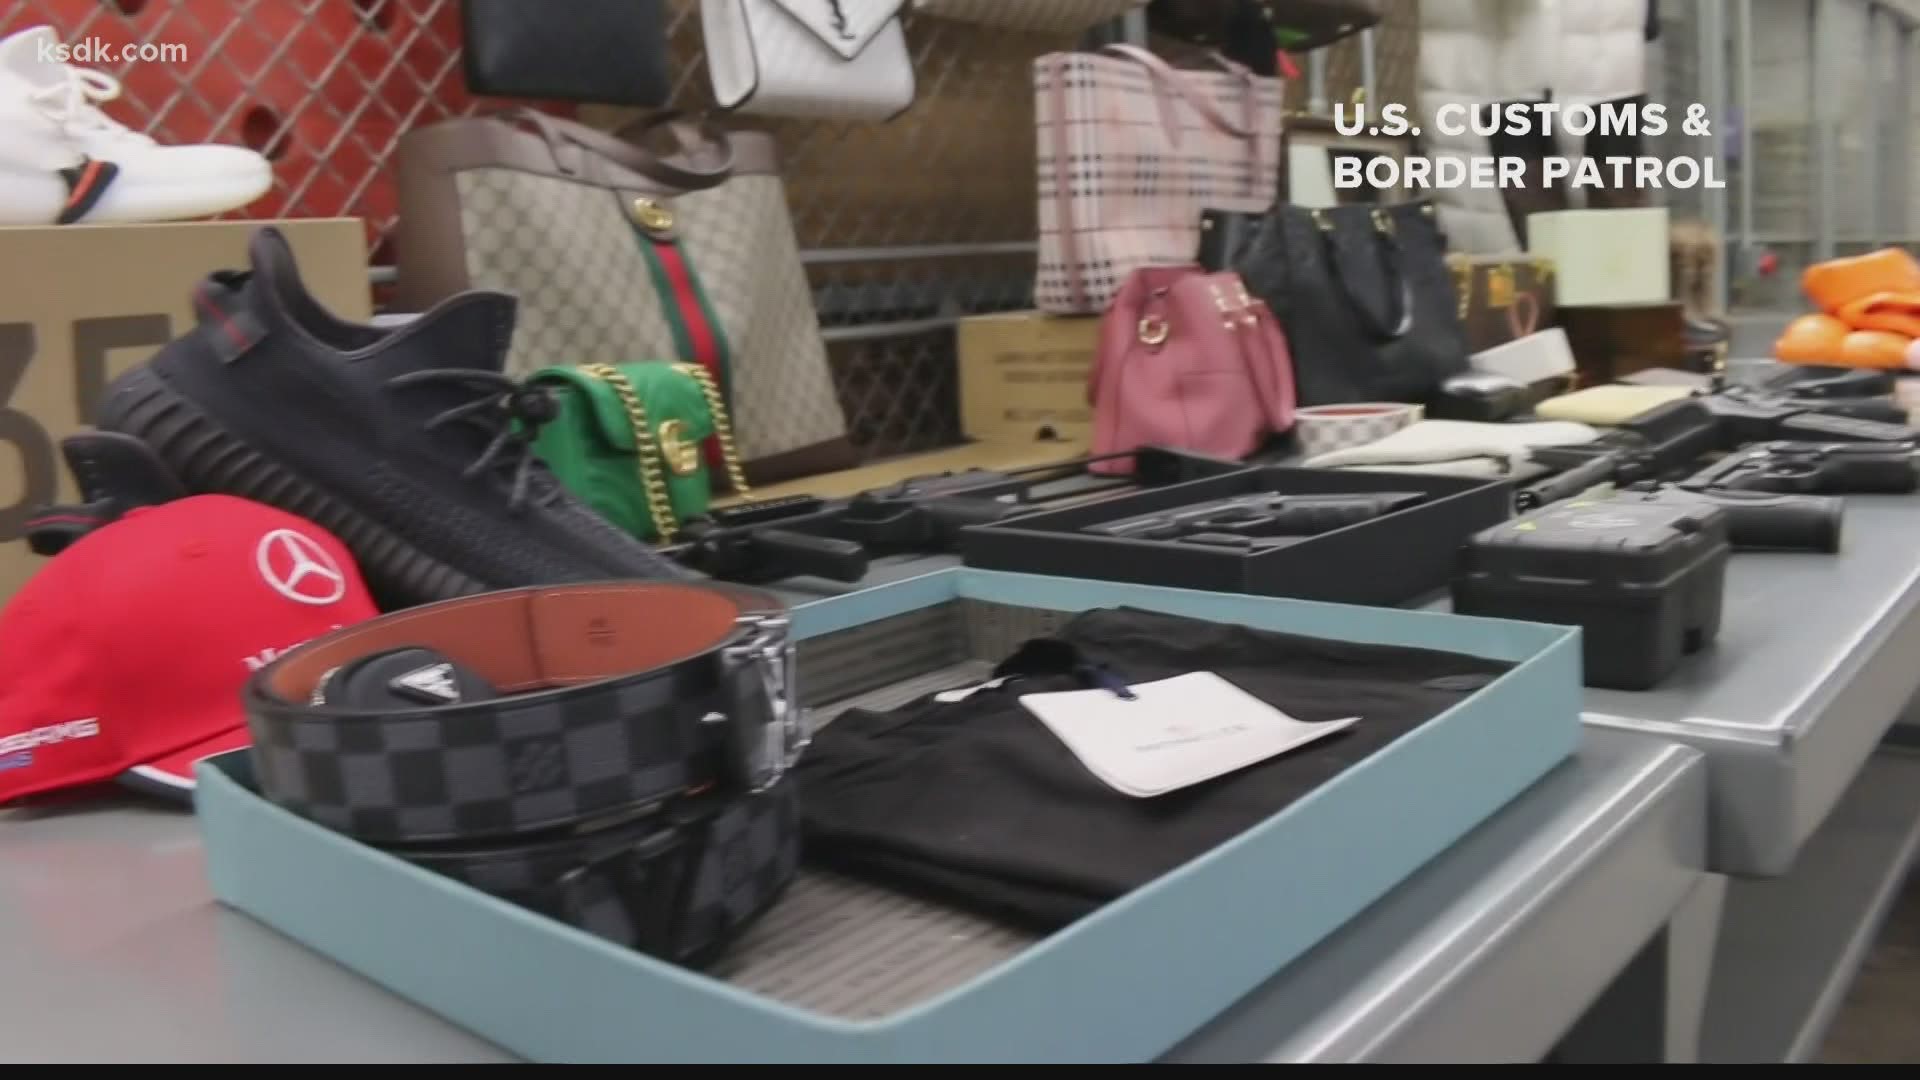 Police: Robbers steal $150,000 in Louis Vuitton products after